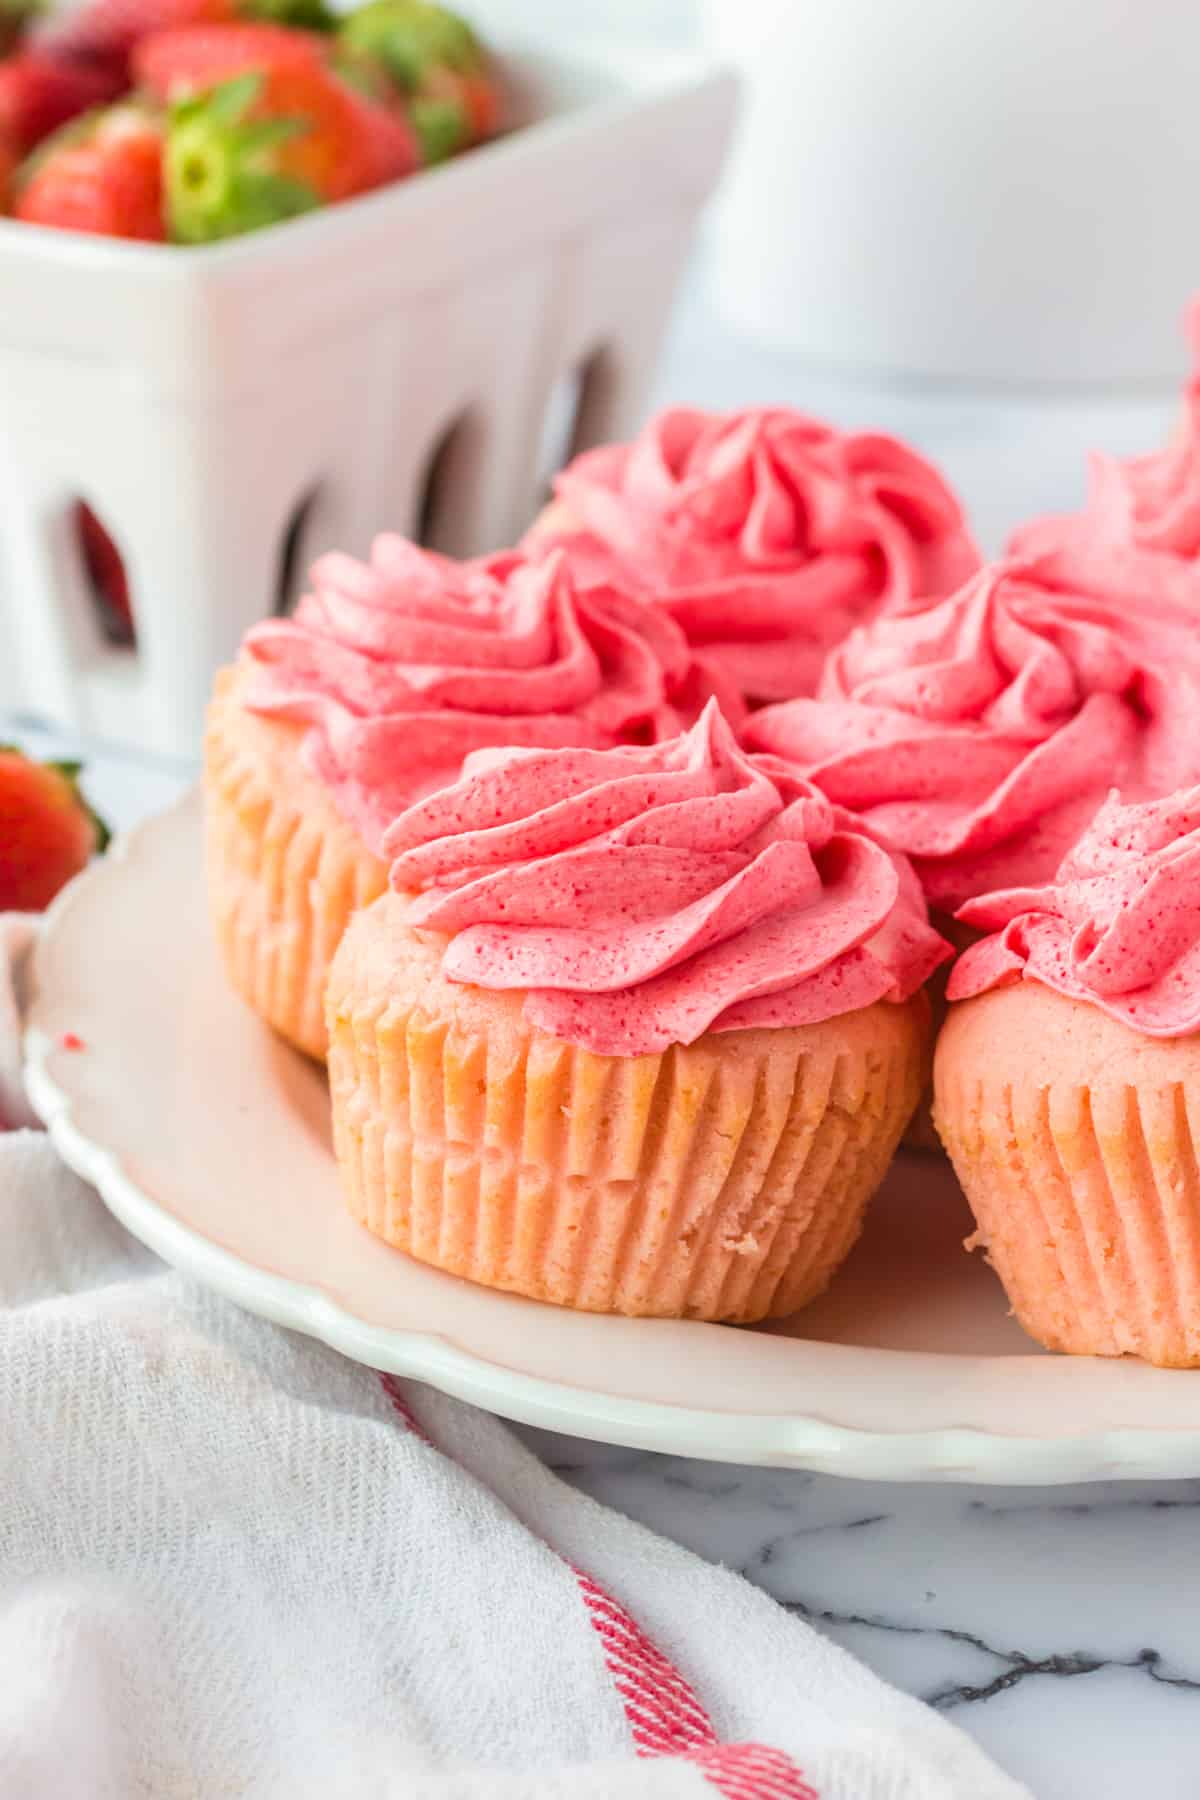 Pink frosted cupcakes with fresh strawberries in the background